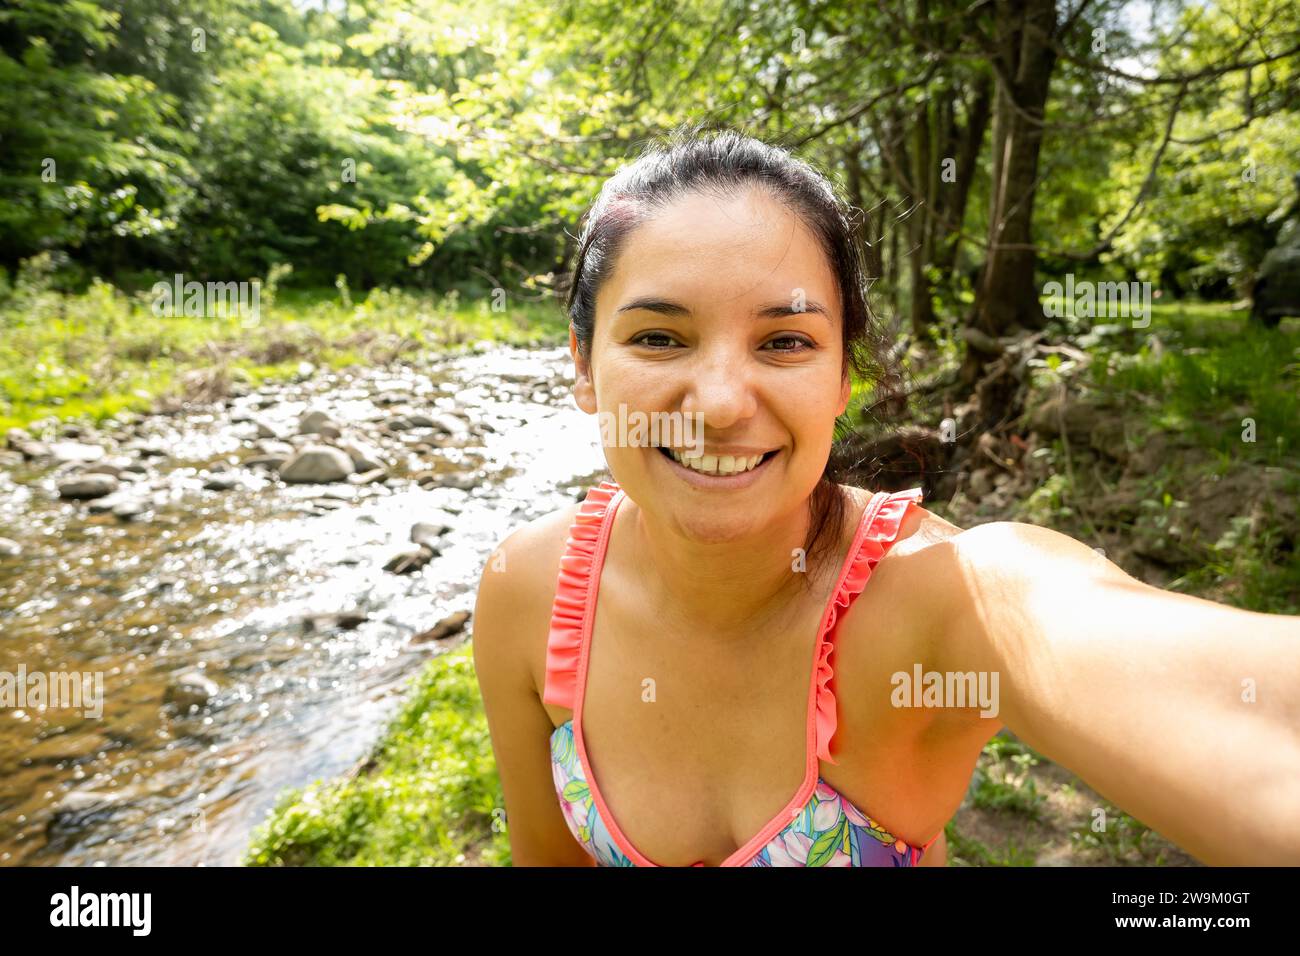 Young adult woman taking a smiling selfie in a stream in Córdoba, Argentina. She is a tourist wearing a colorful bikini. Stock Photo